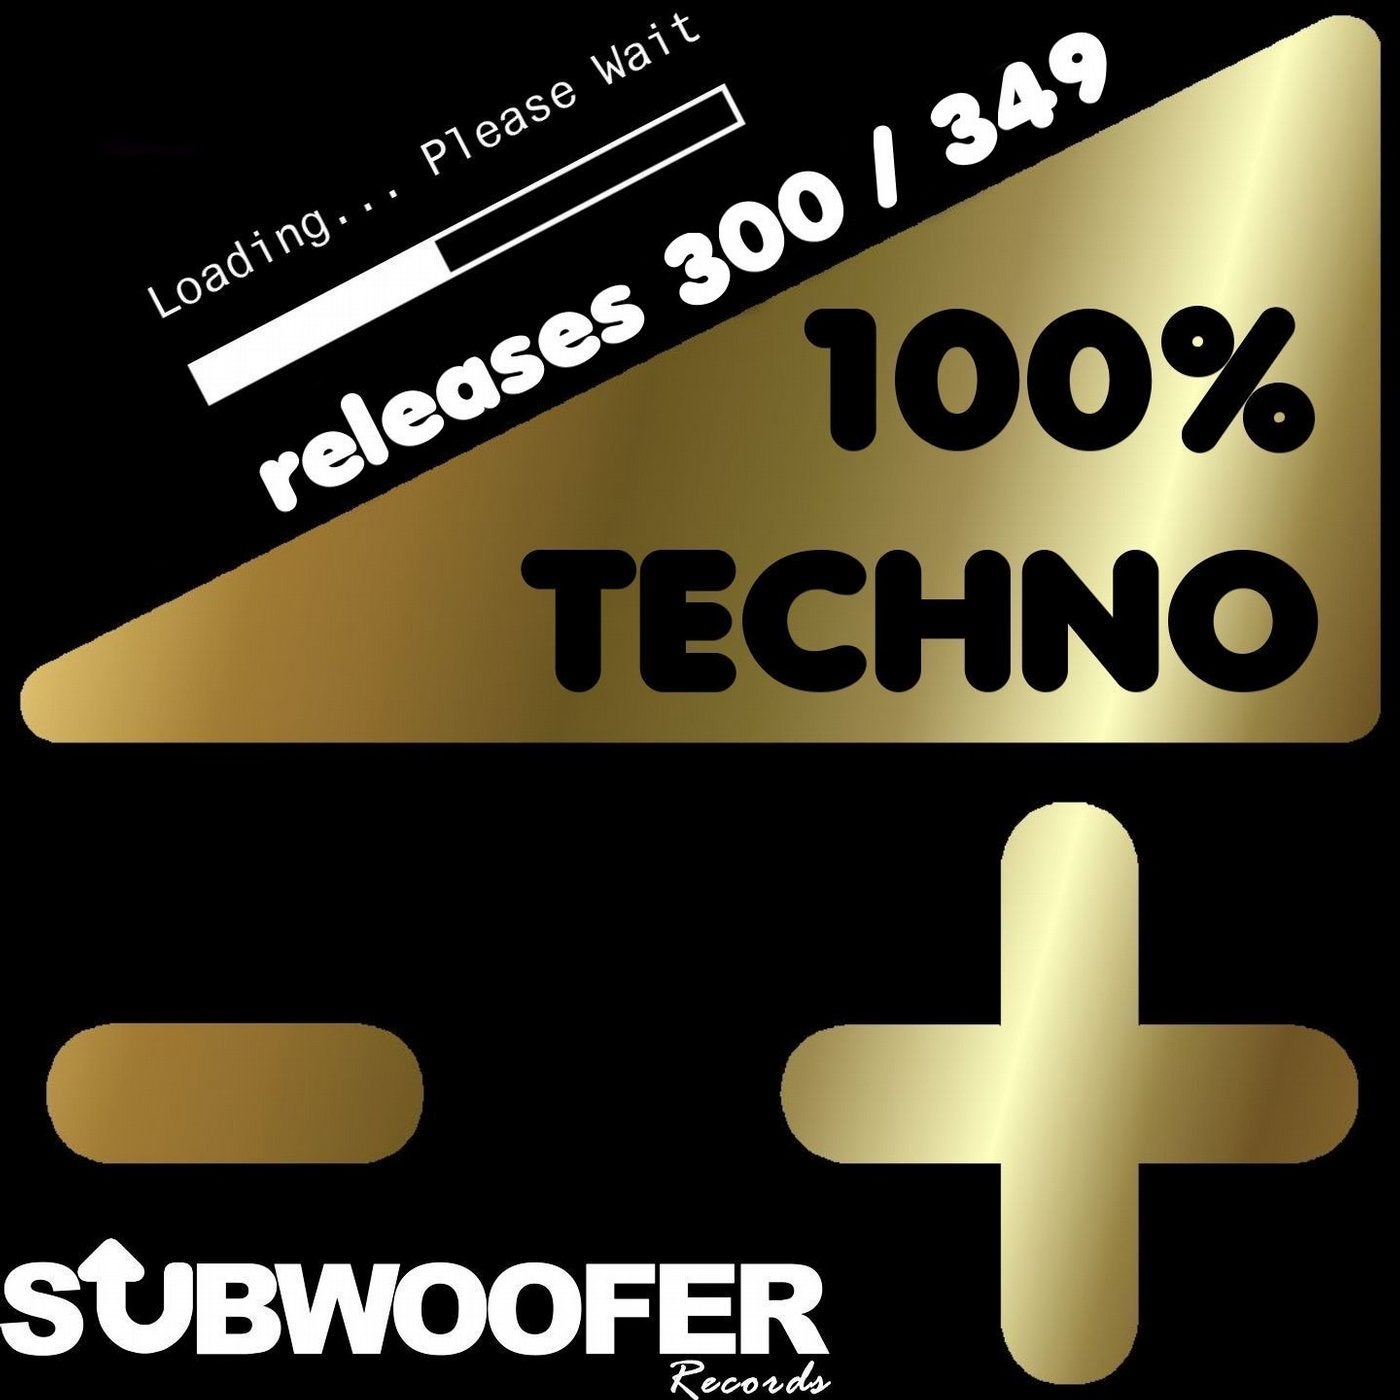 100%% Techno Subwoofer Records, Vol. 7 (Releases 300 / 349)